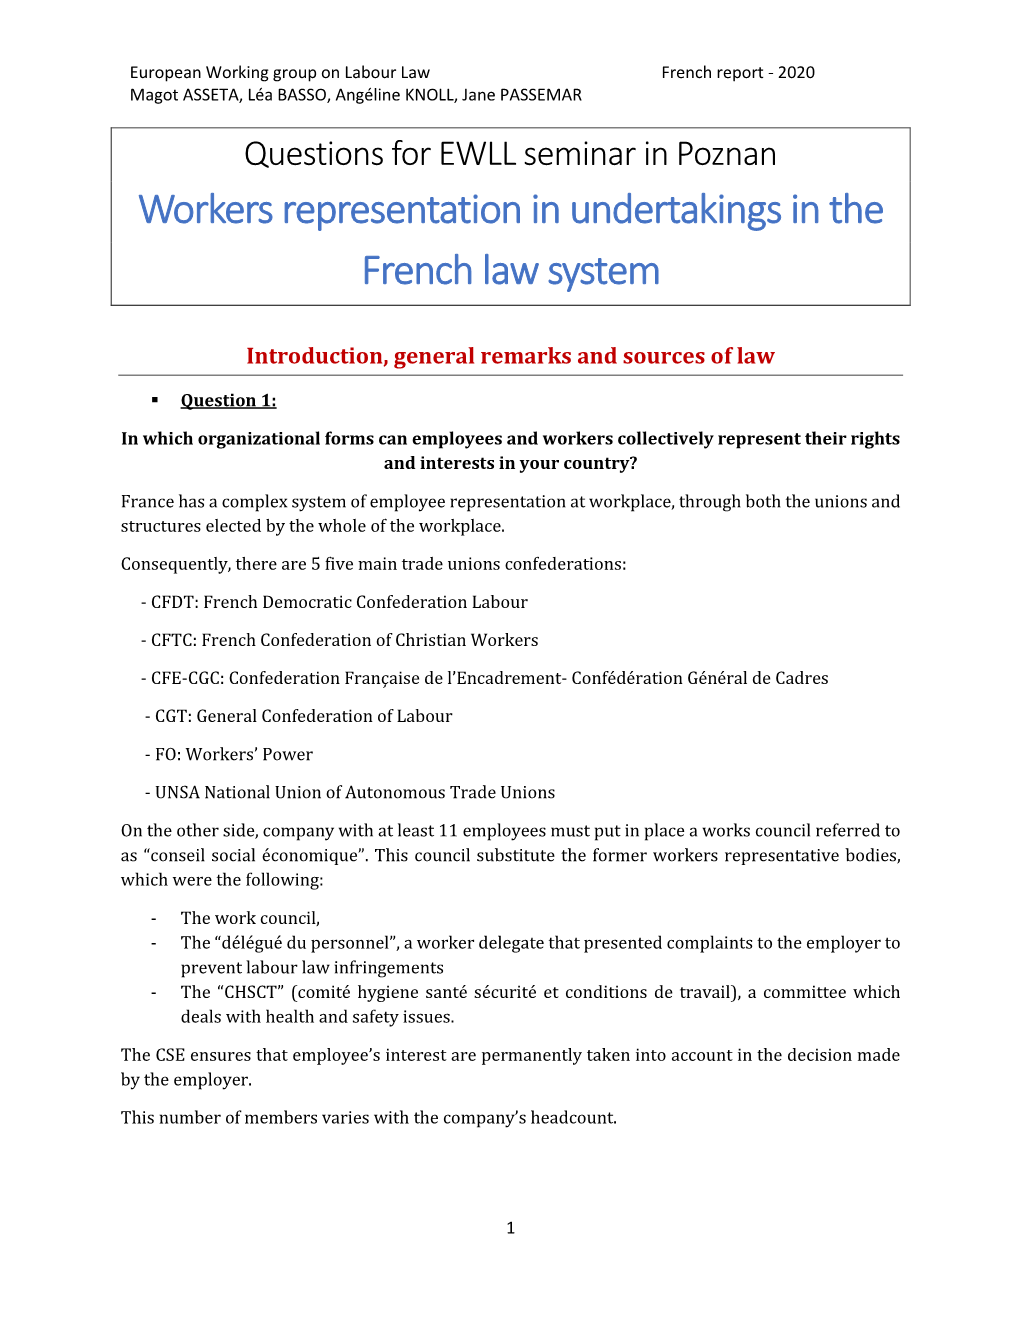 Workers Representation in Undertakings in the French Law System